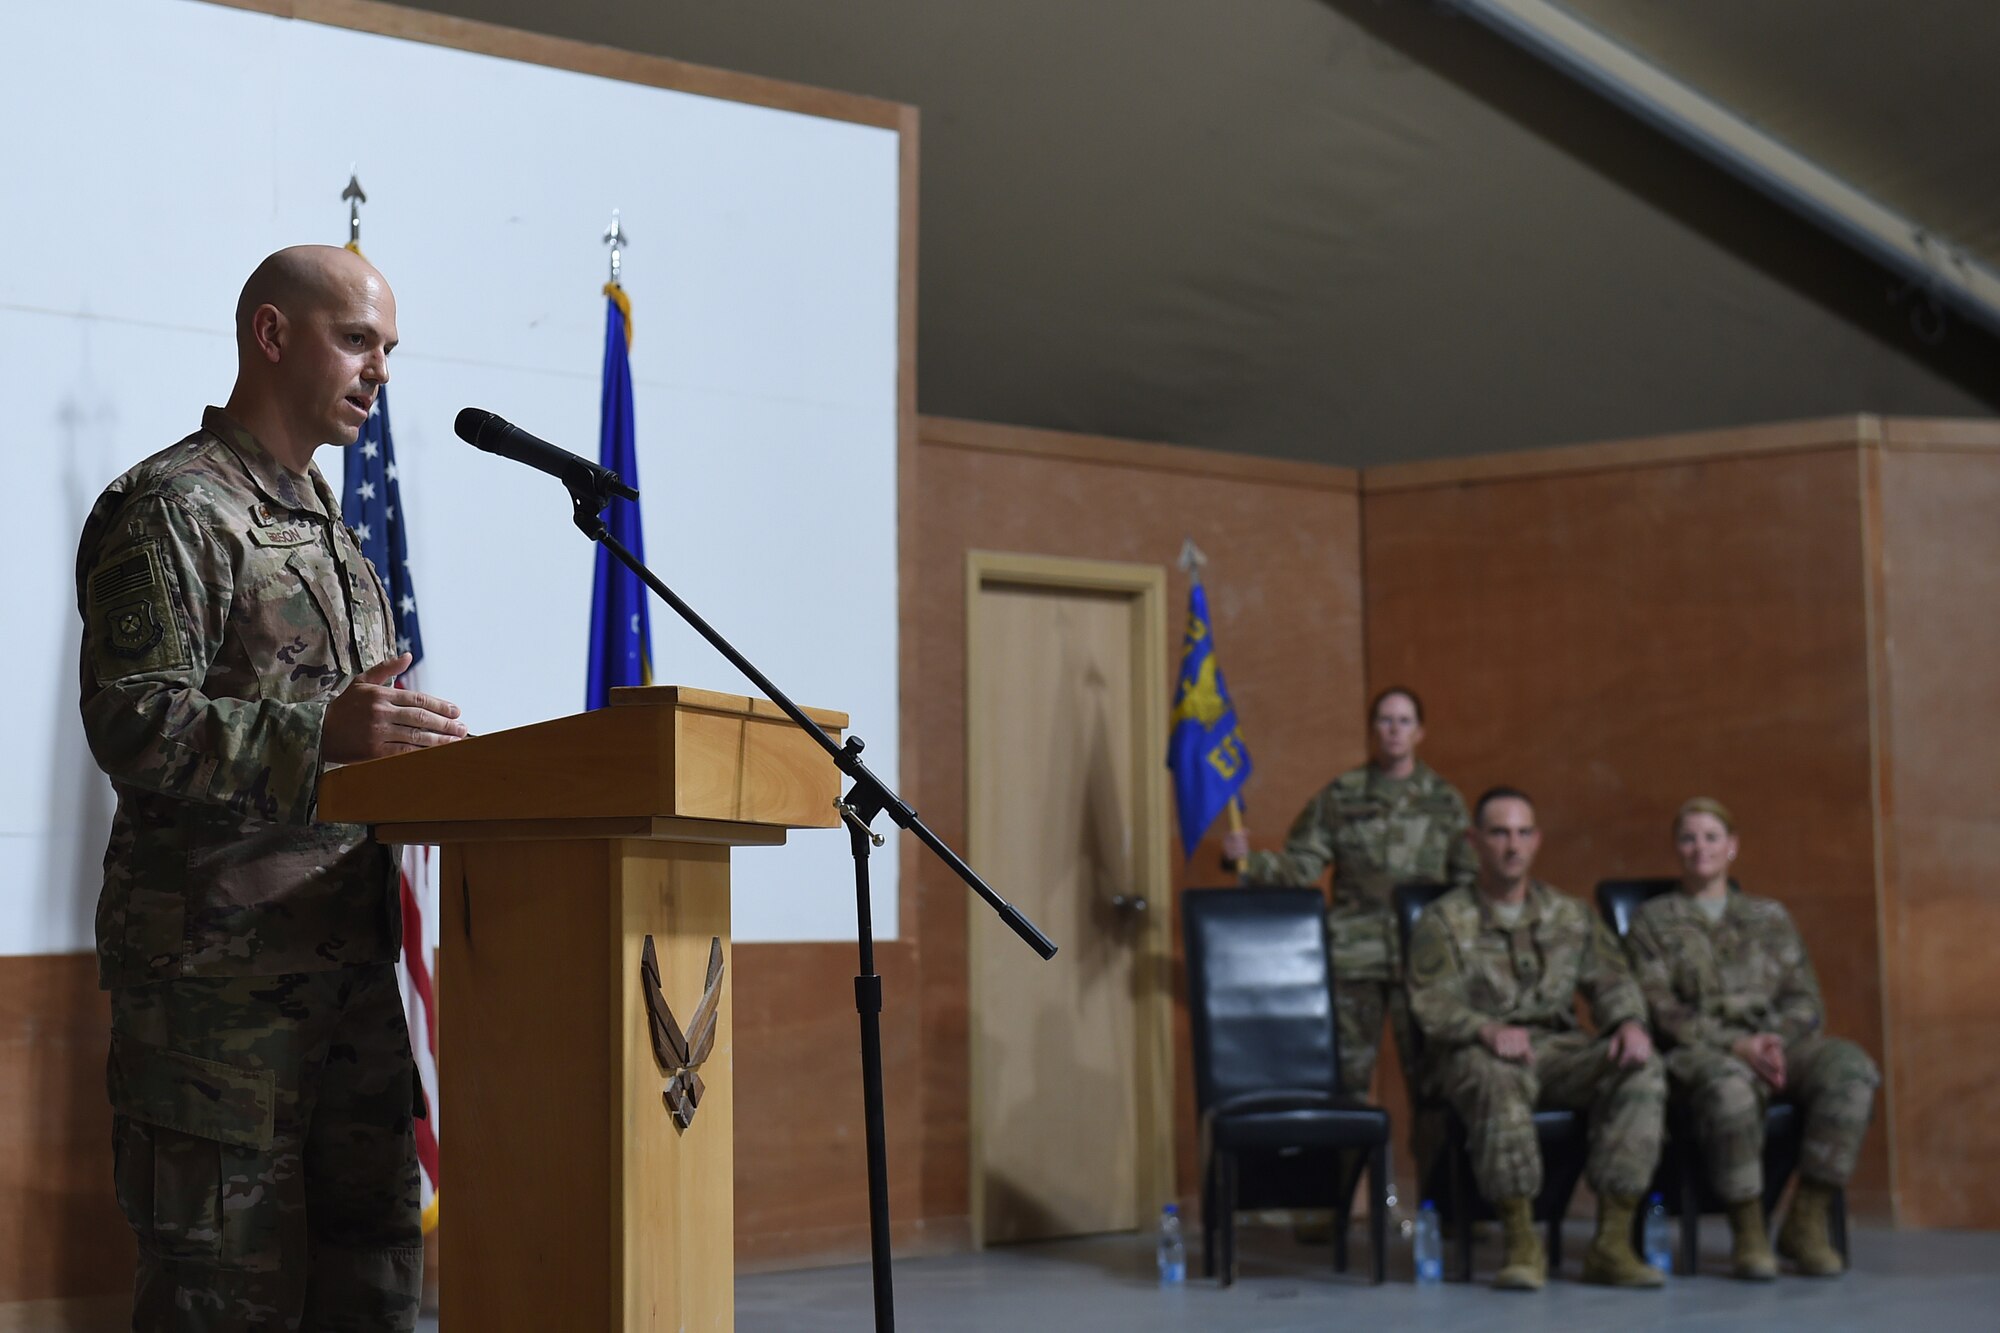 Airman stands behind podium to speak to audience.